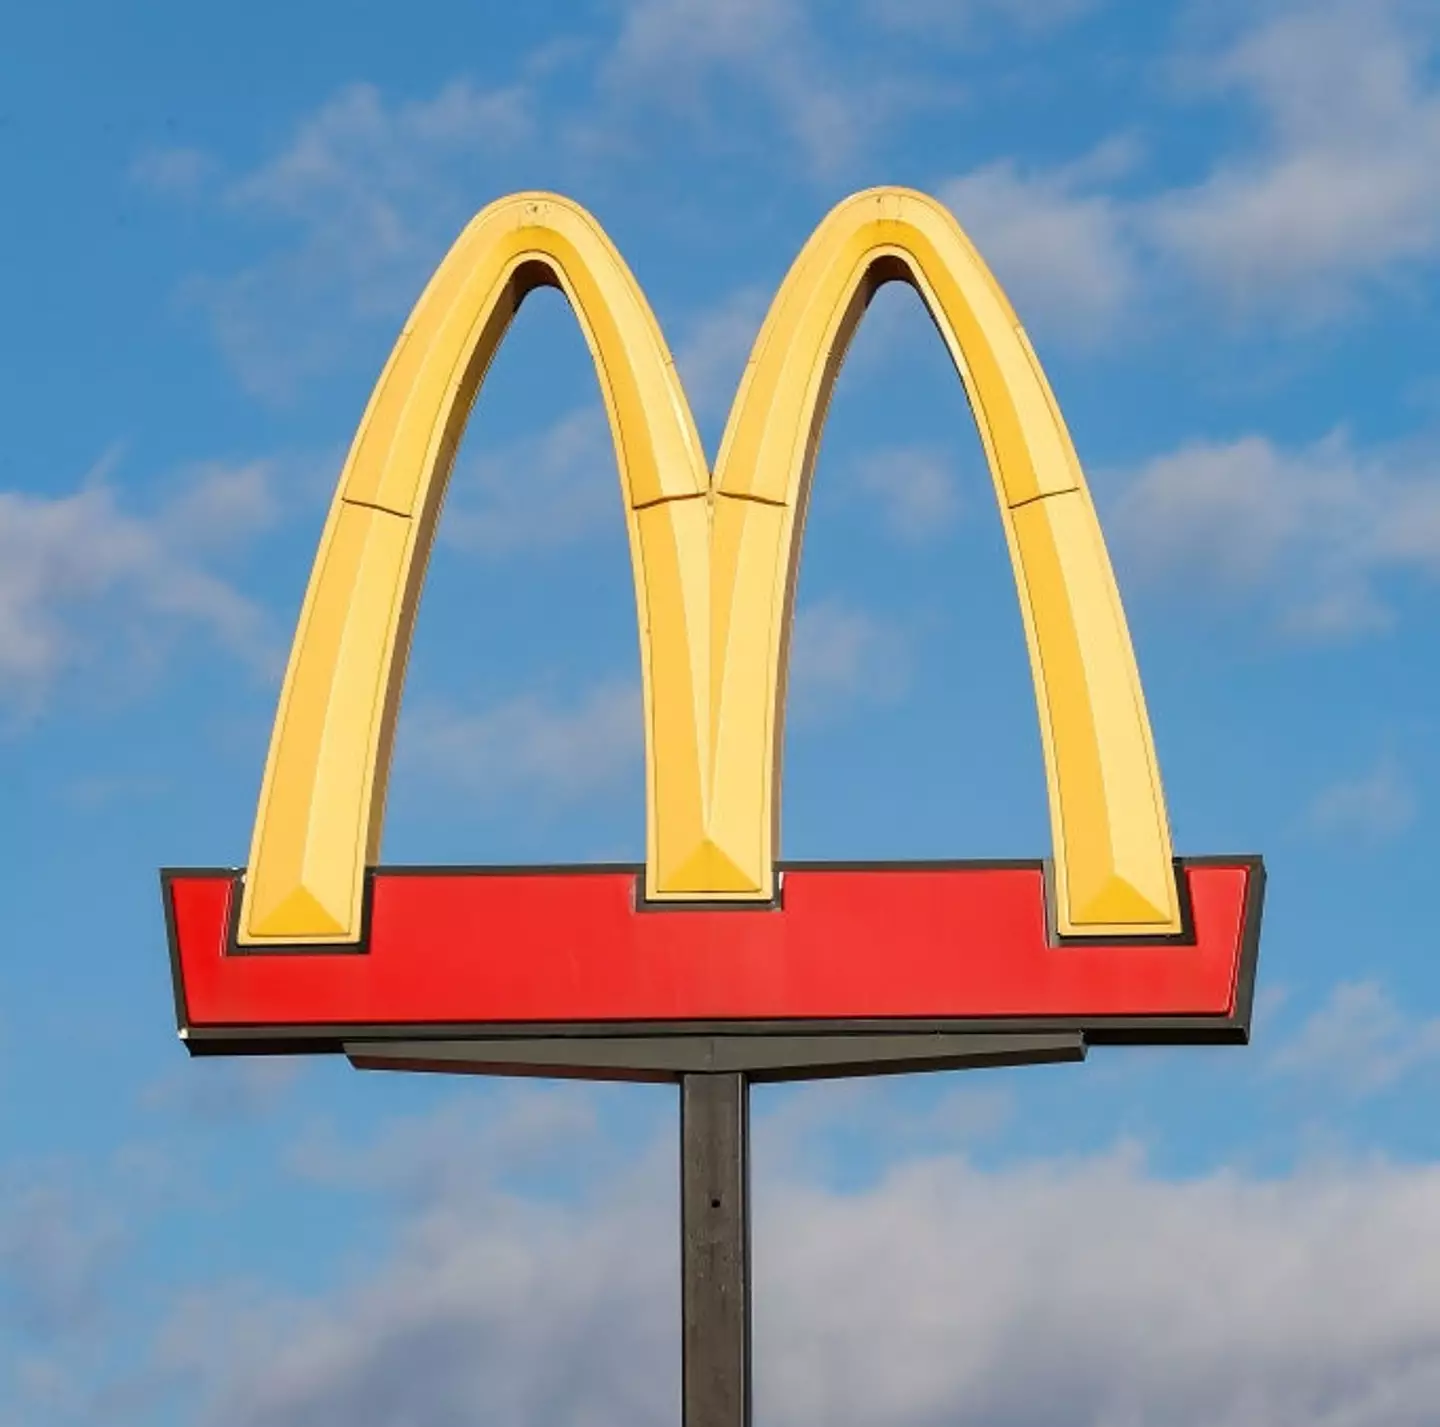 A judge ruled in favour of McDonald's over the size of their burgers.